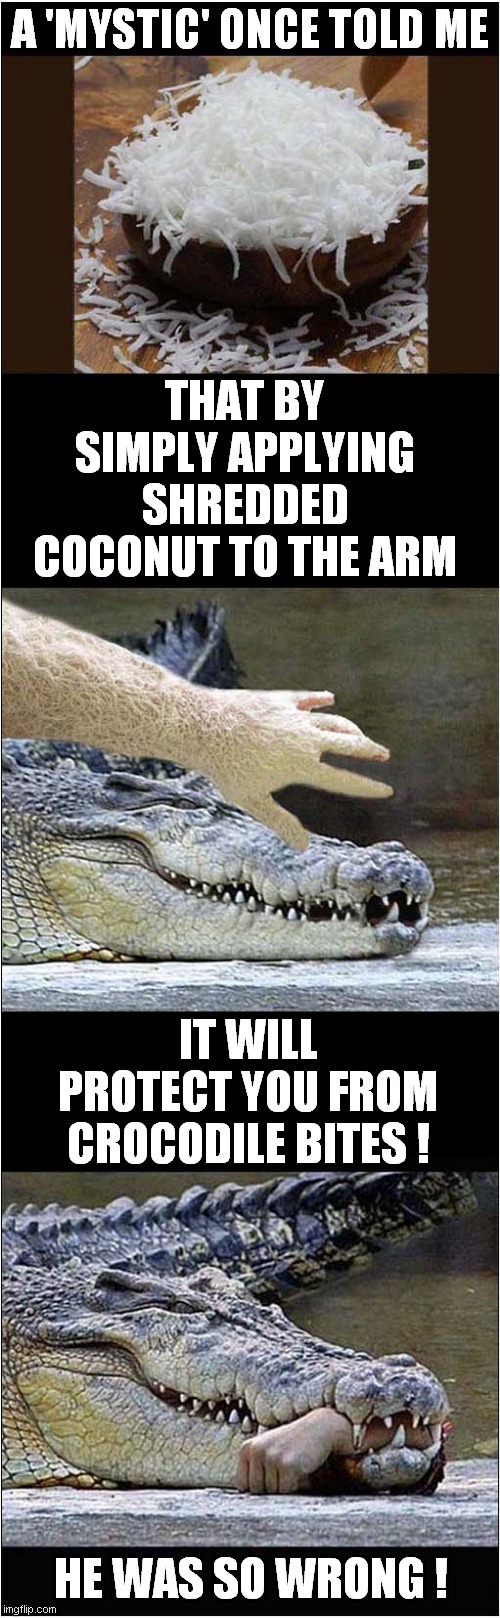 Who Knew Crocodiles Love A Coconut Topping On Their Food ! | A 'MYSTIC' ONCE TOLD ME; THAT BY SIMPLY APPLYING SHREDDED COCONUT TO THE ARM; IT WILL PROTECT YOU FROM CROCODILE BITES ! HE WAS SO WRONG ! | image tagged in fun,coconut,crocodile,bite,amputation,dark humor | made w/ Imgflip meme maker